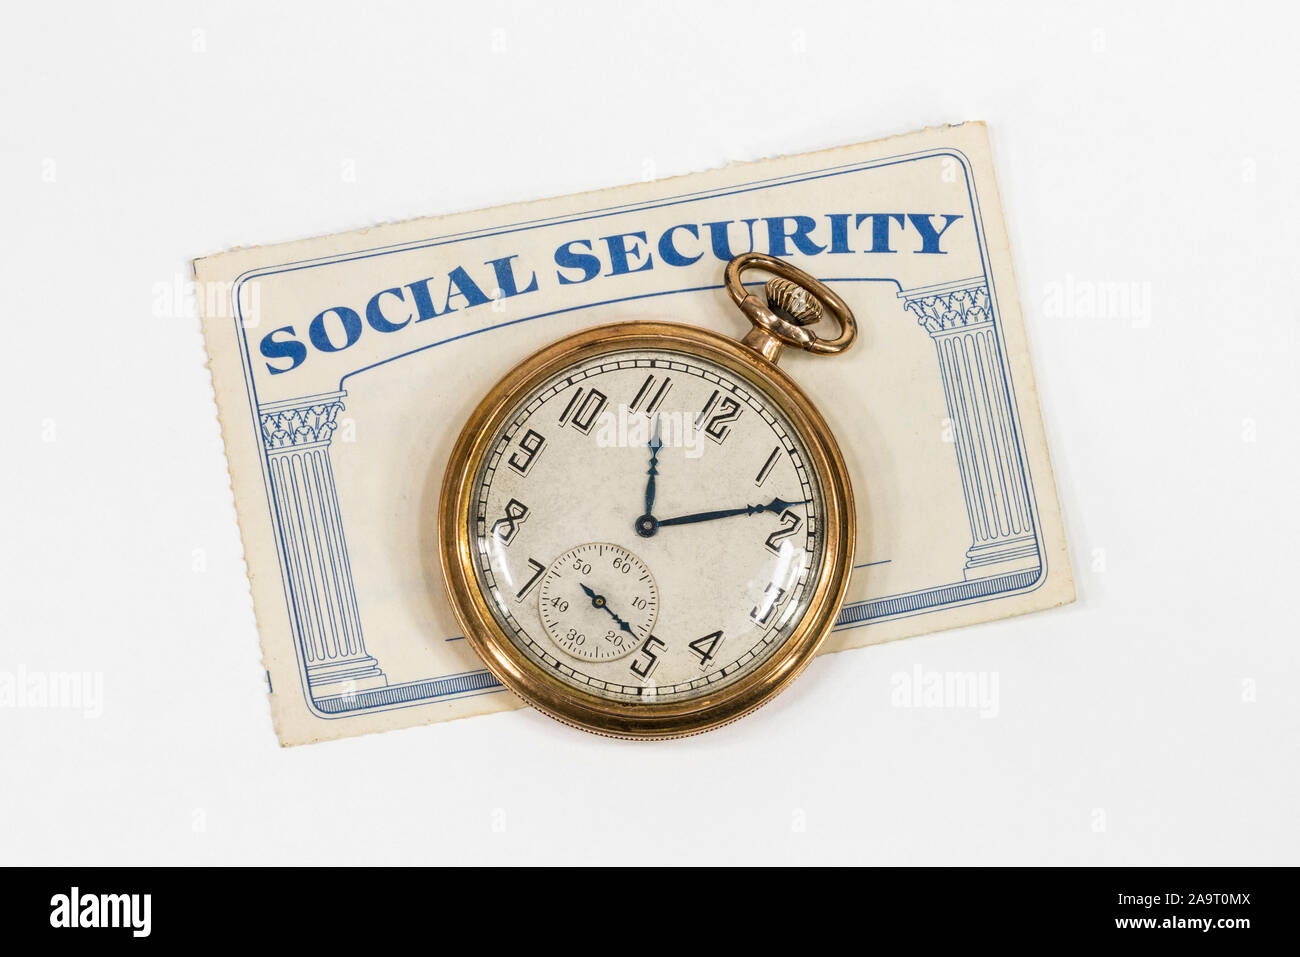 Old Social Security card with antique pocket watch and white background. Stock Photo